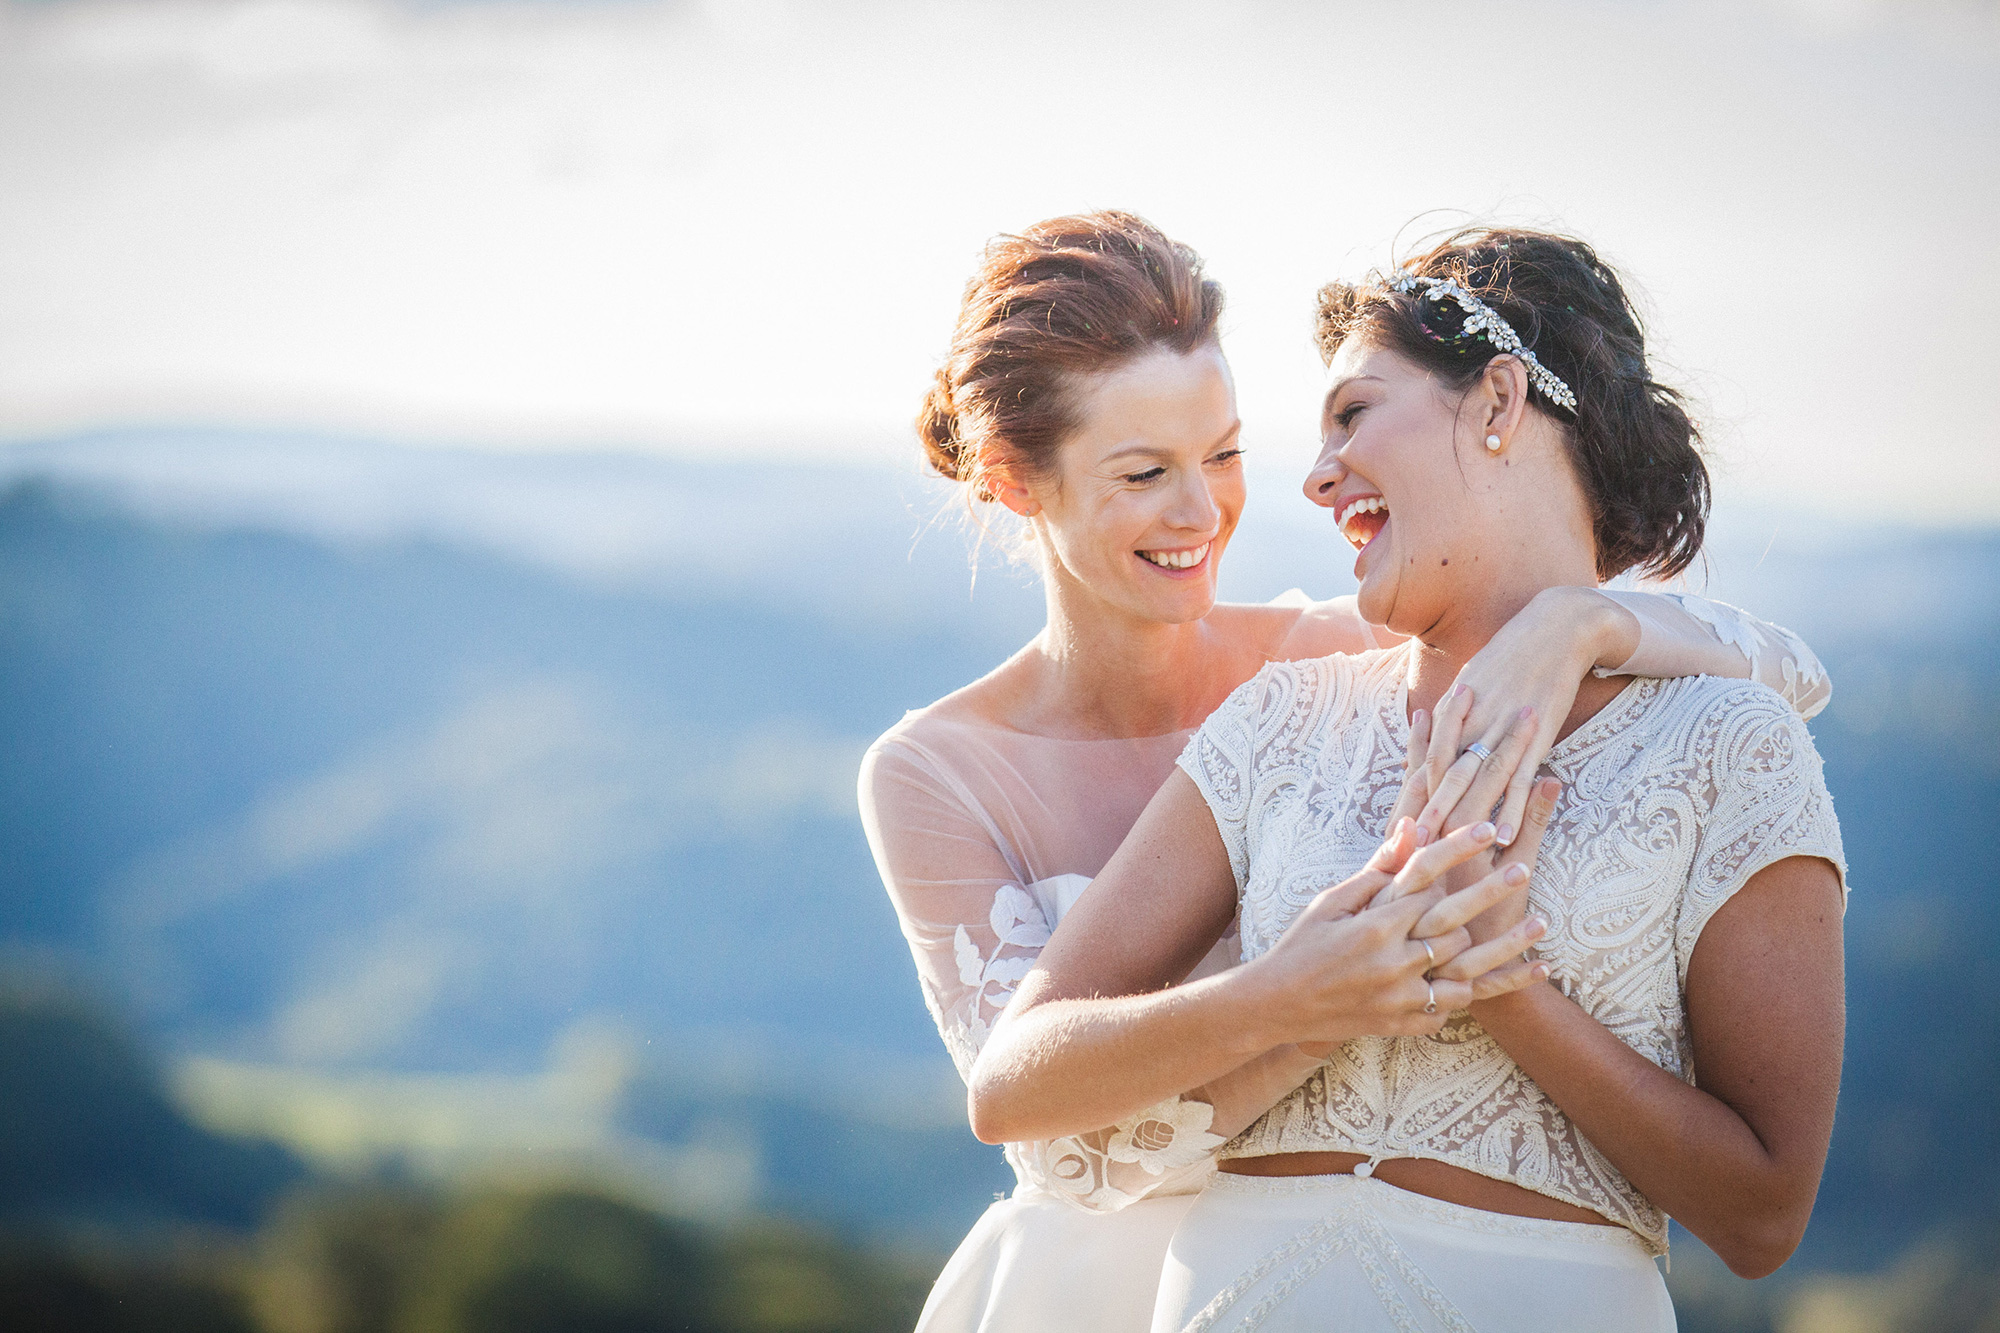 Two Australian brides at their luxe rustic wedding